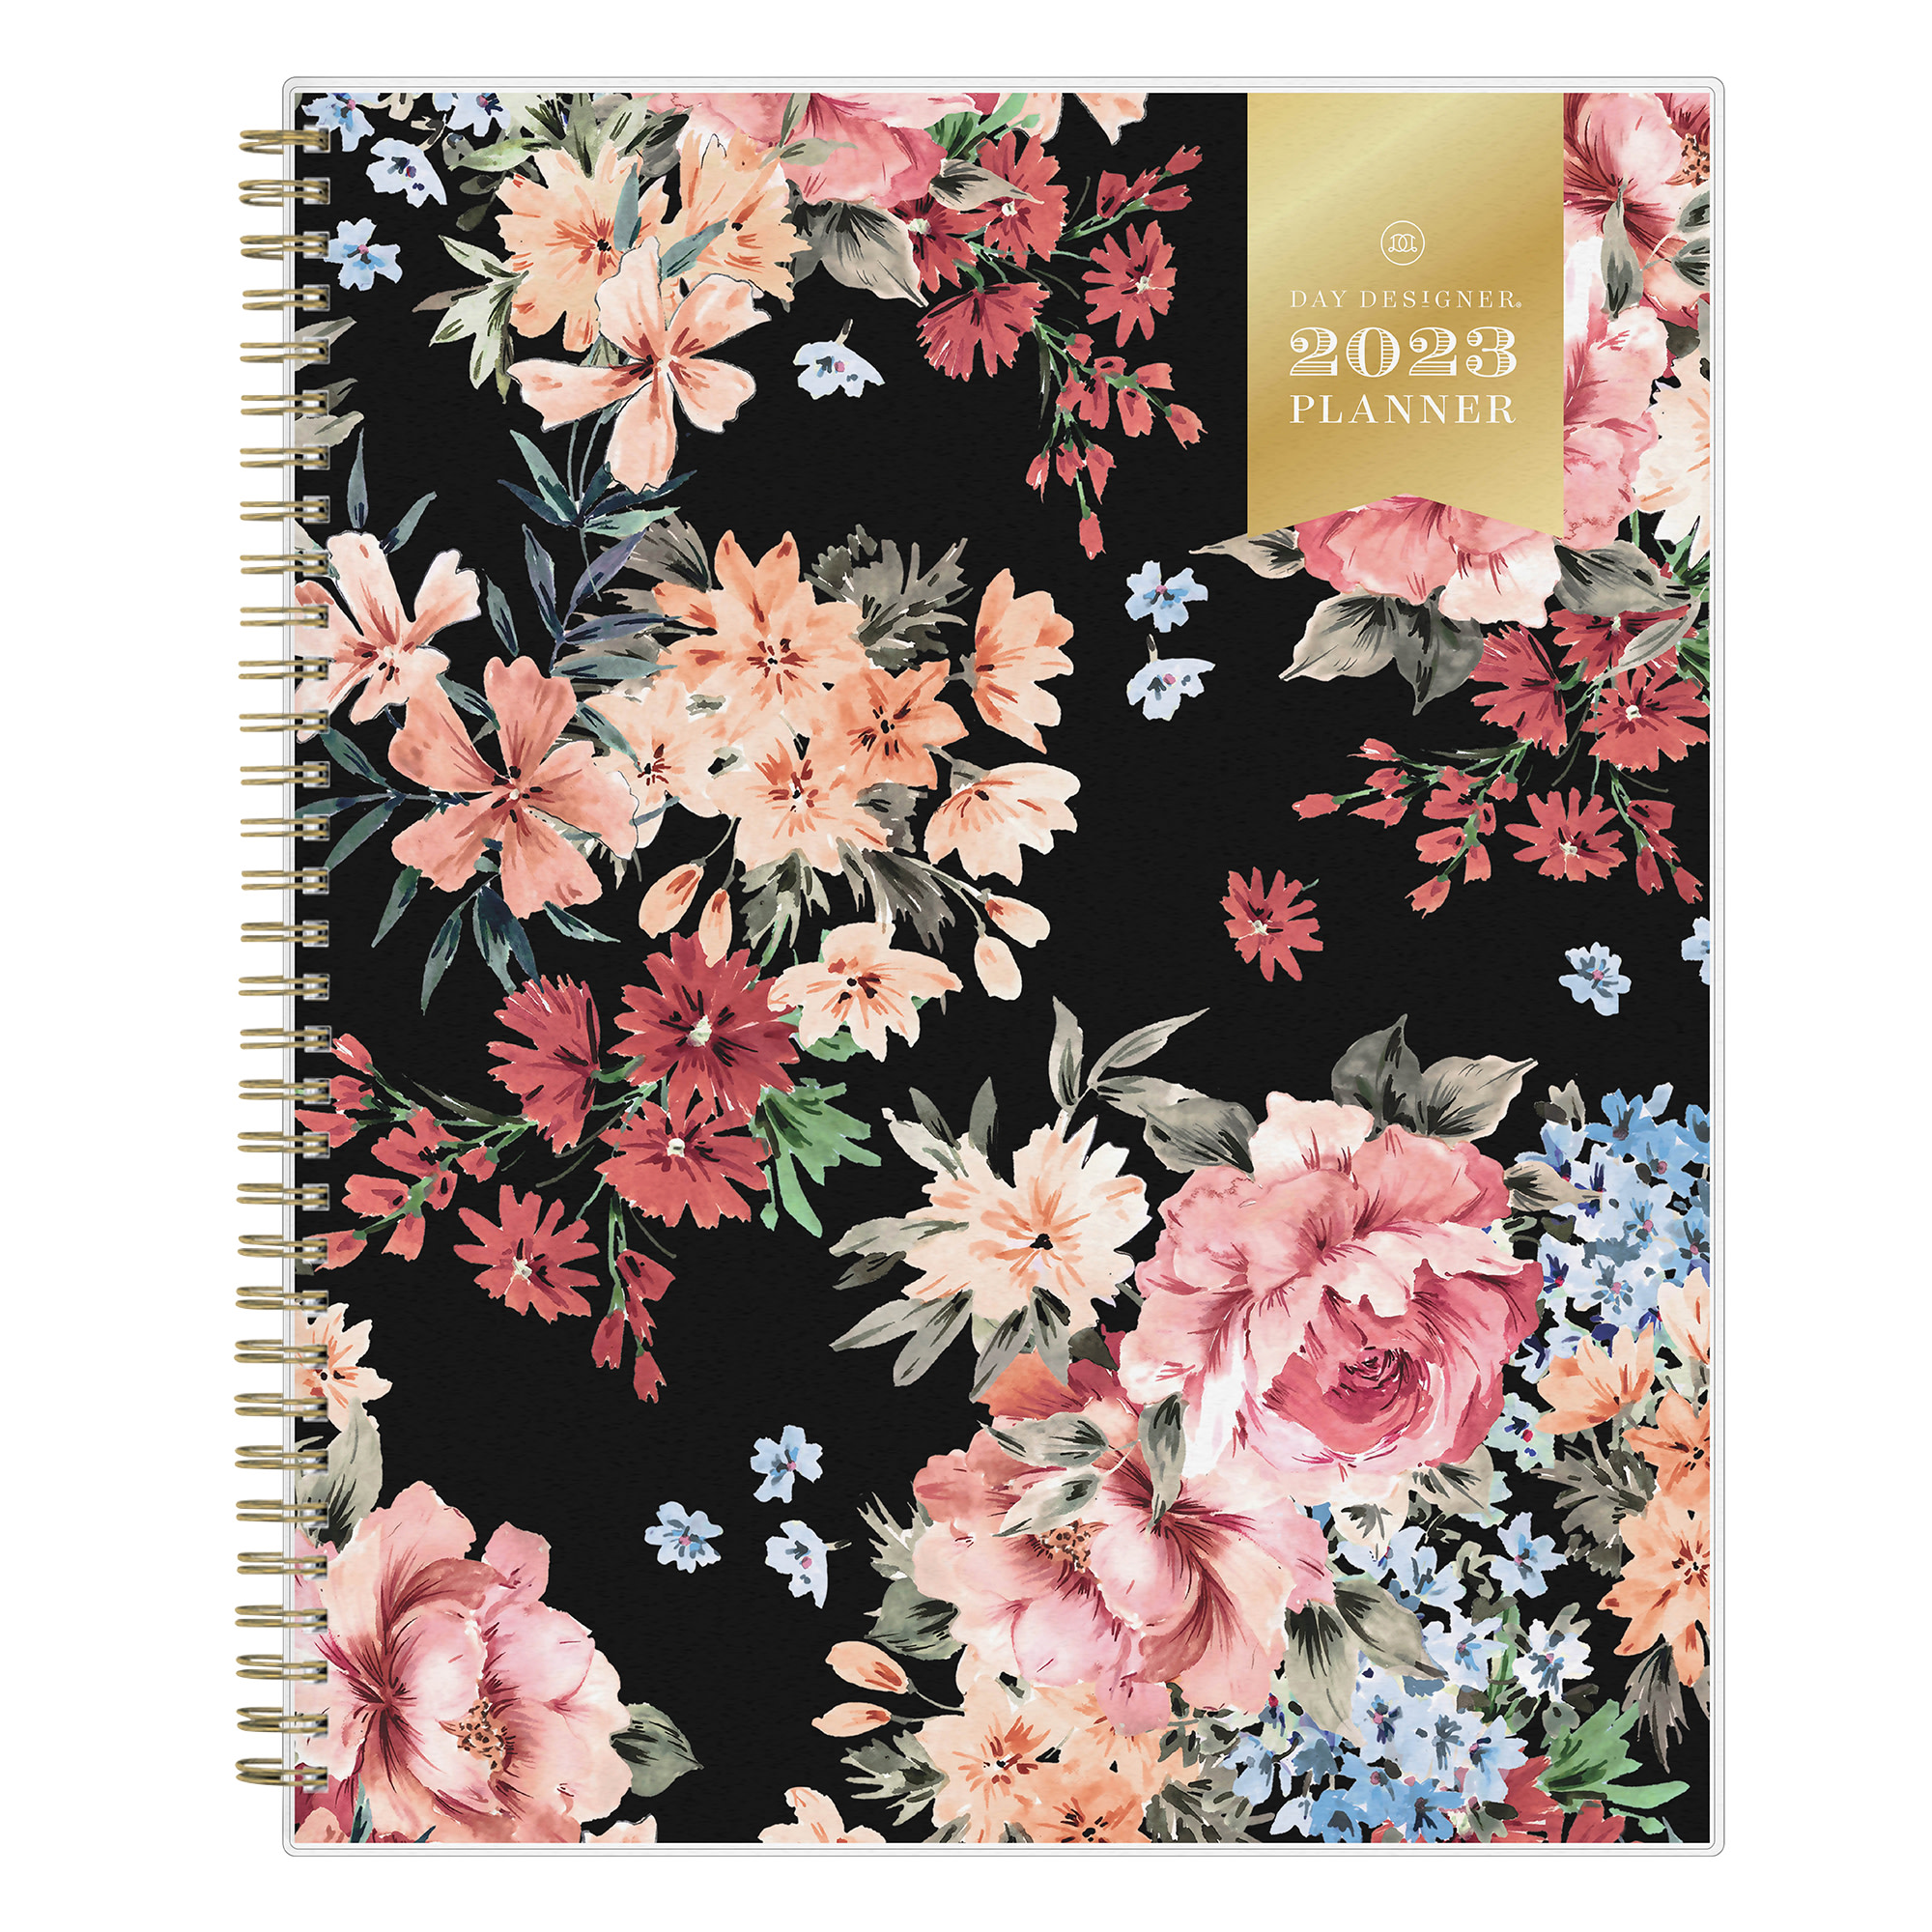 Day Designer Planners in Calendars and Planners 